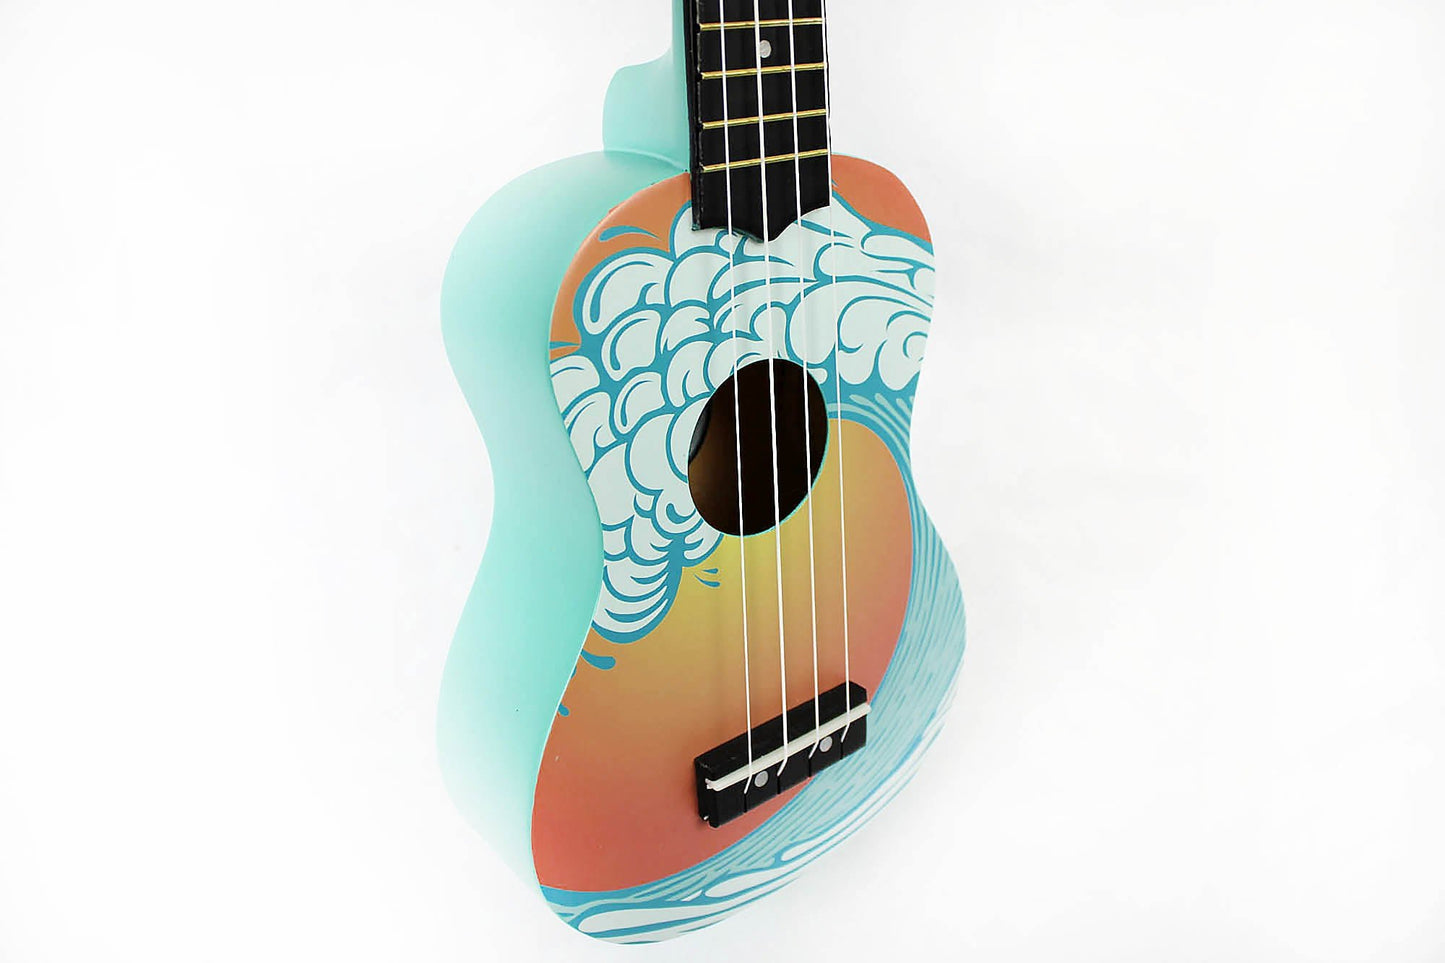 This is the front side view of an Amahi DDUK9 Ocean Soprano Ukulele.